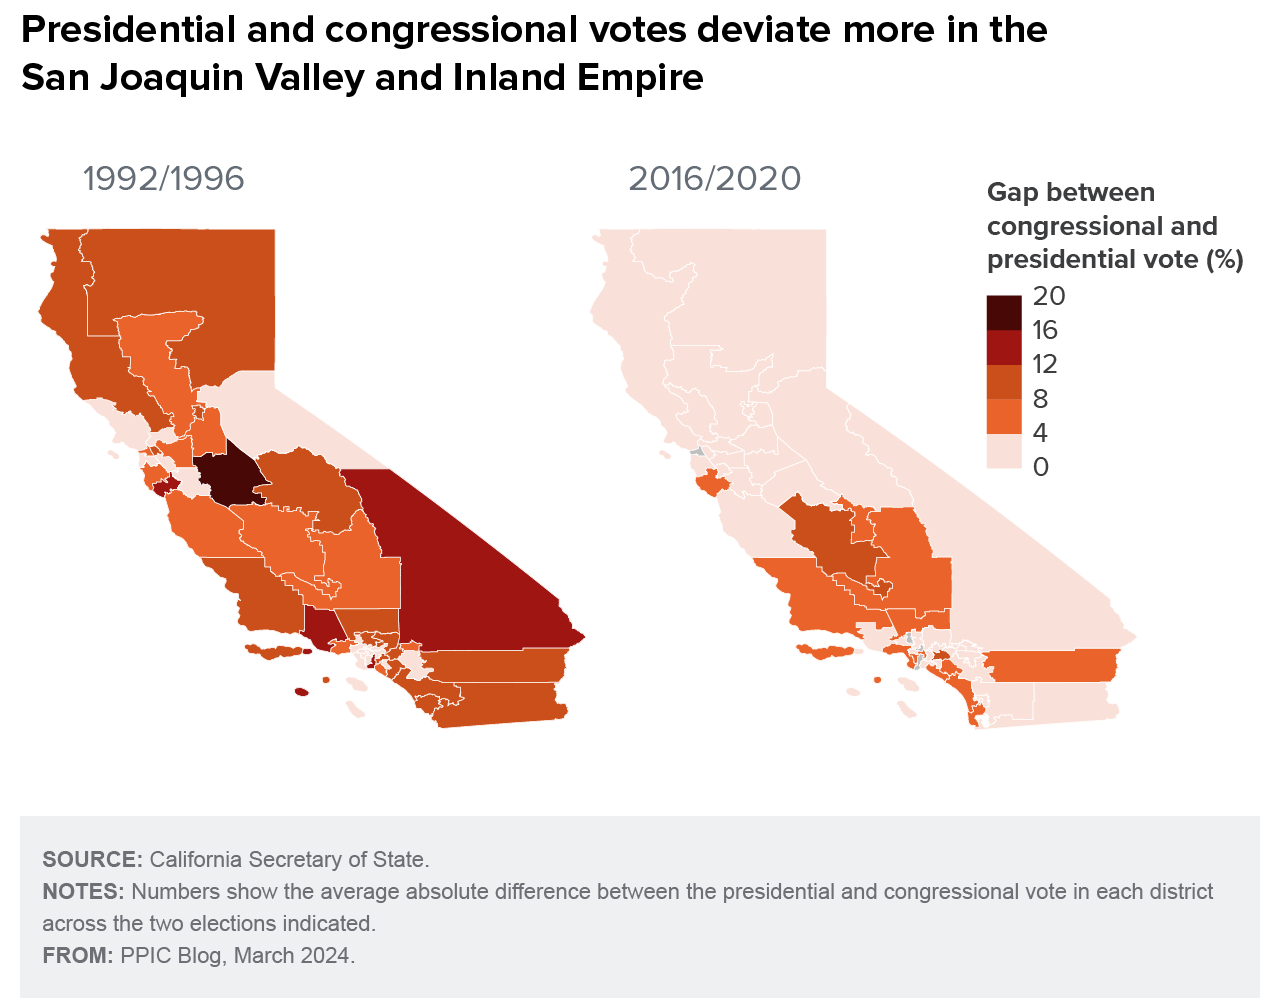 figure - Presidential and congressional votes deviate more in the San Joaquin Valley and Inland